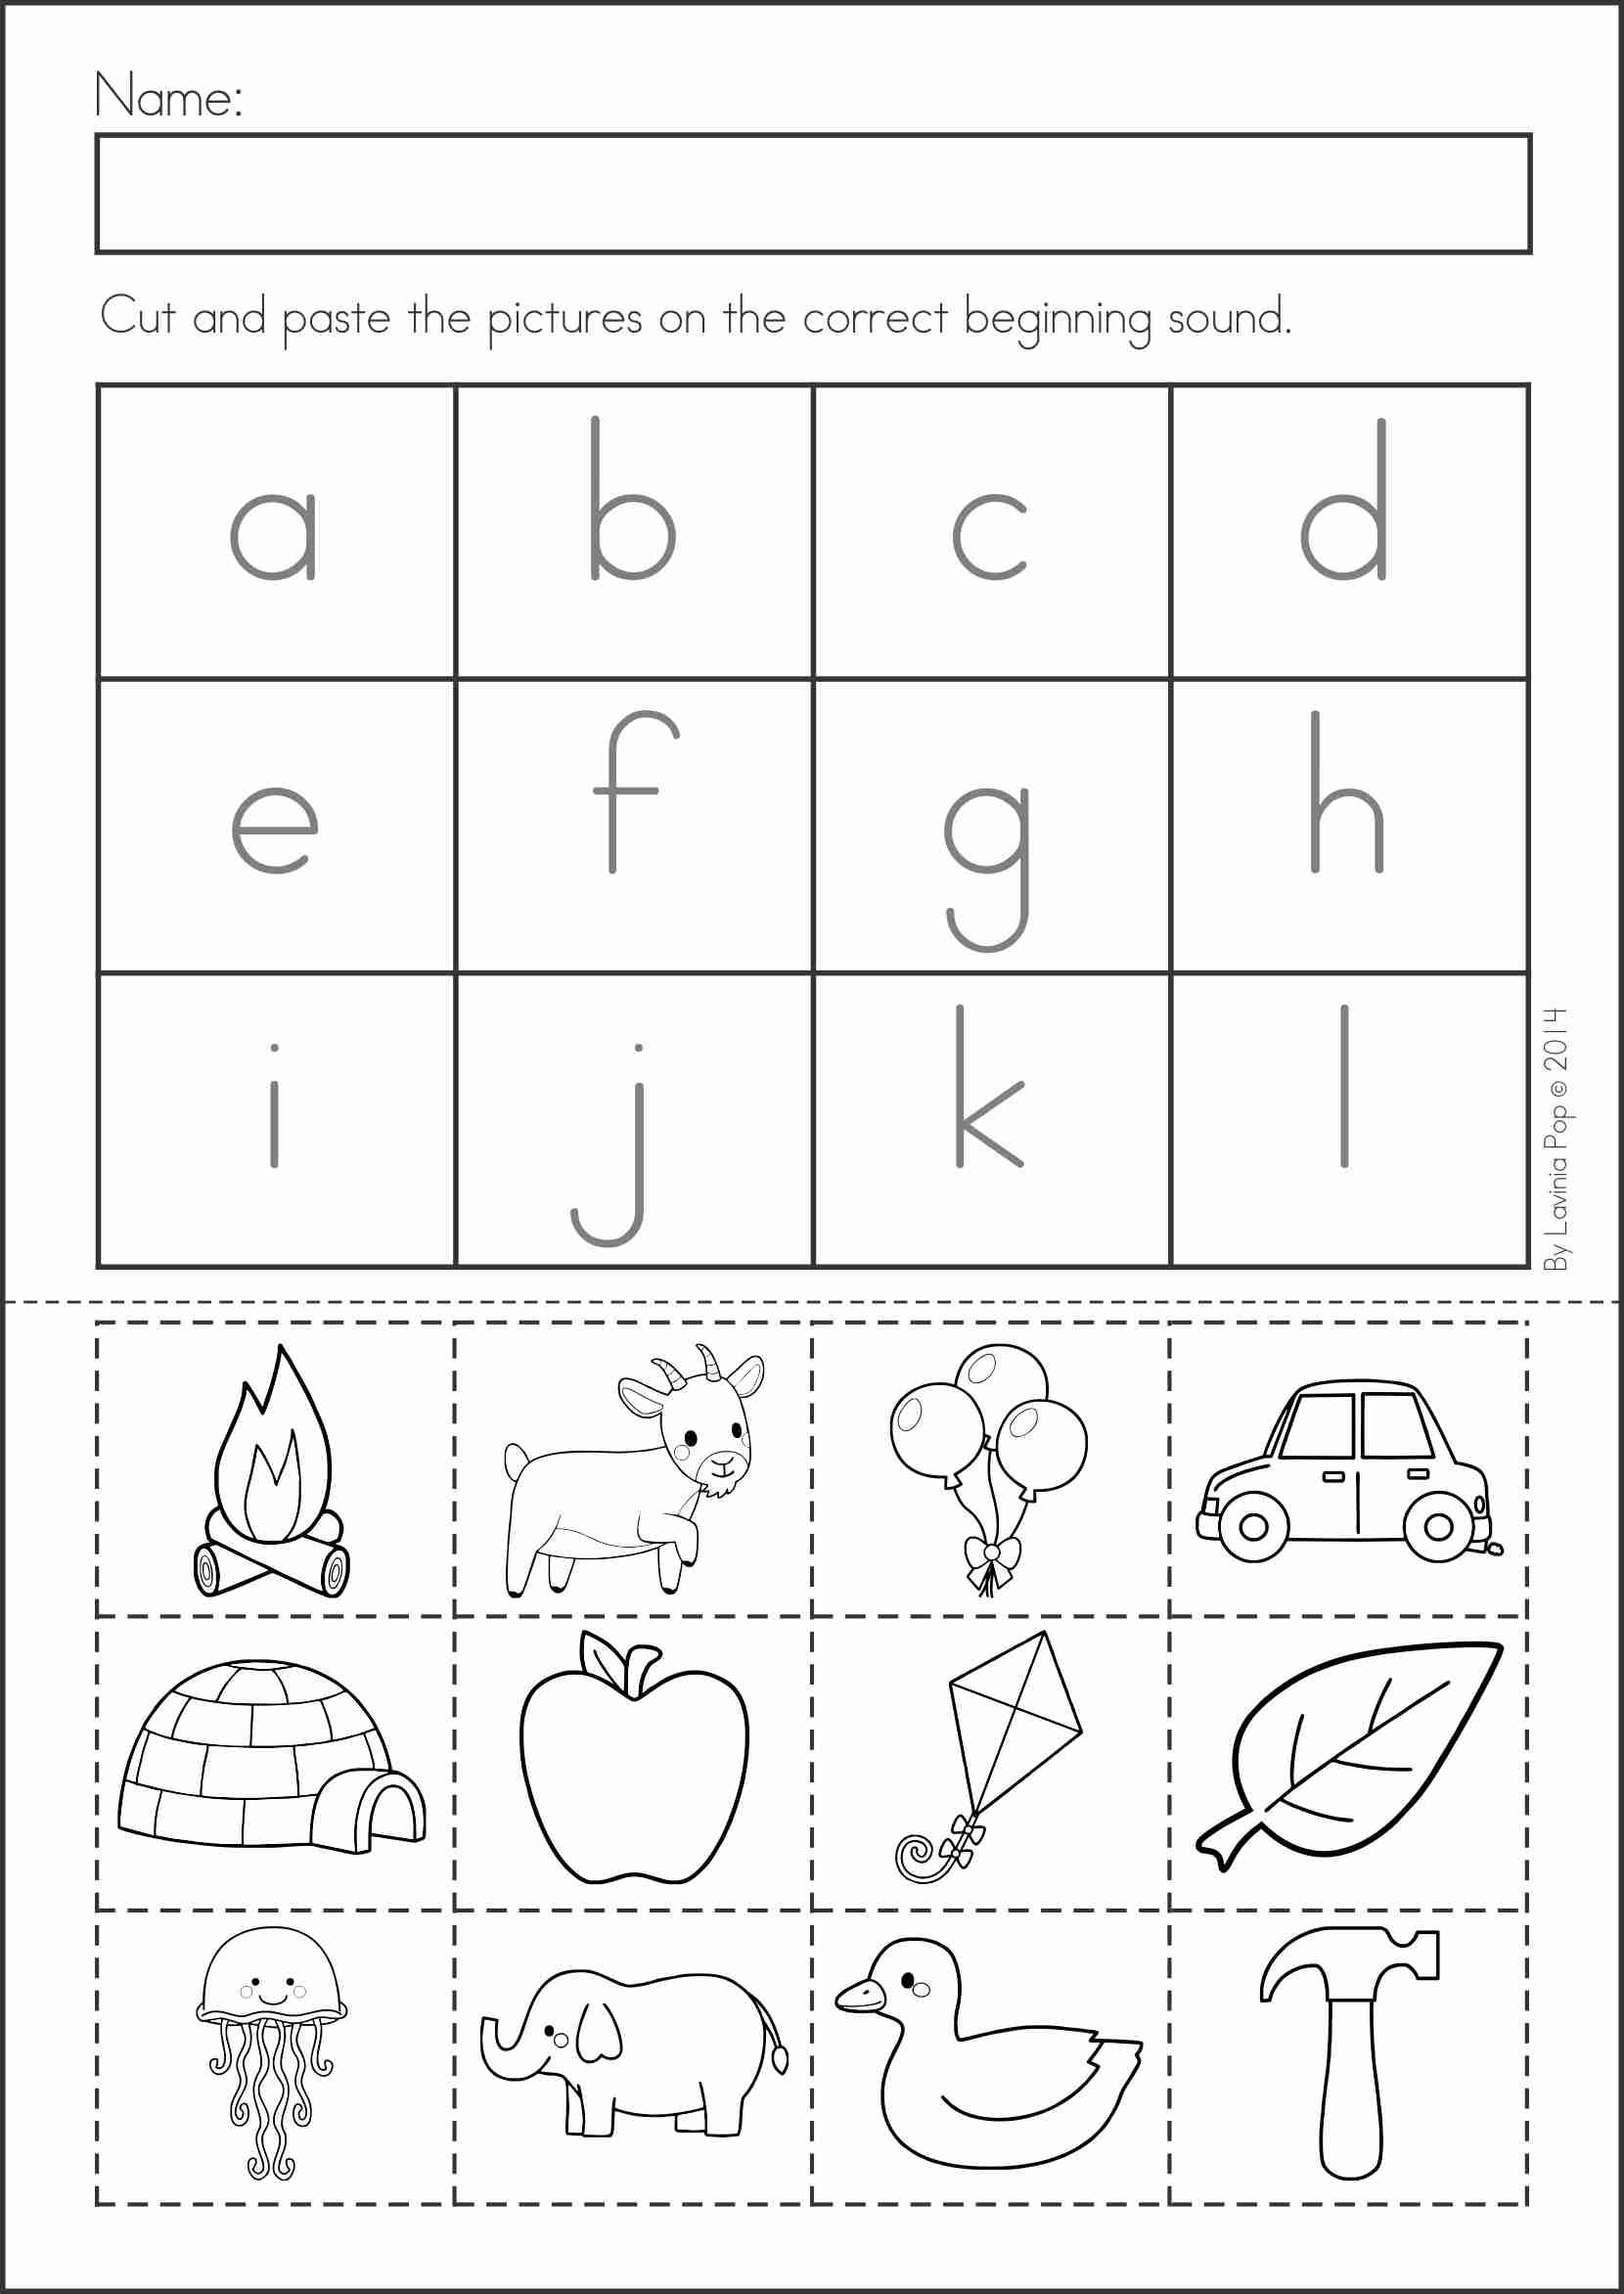 Pin On Educational within Letter E Worksheets Cut And Paste